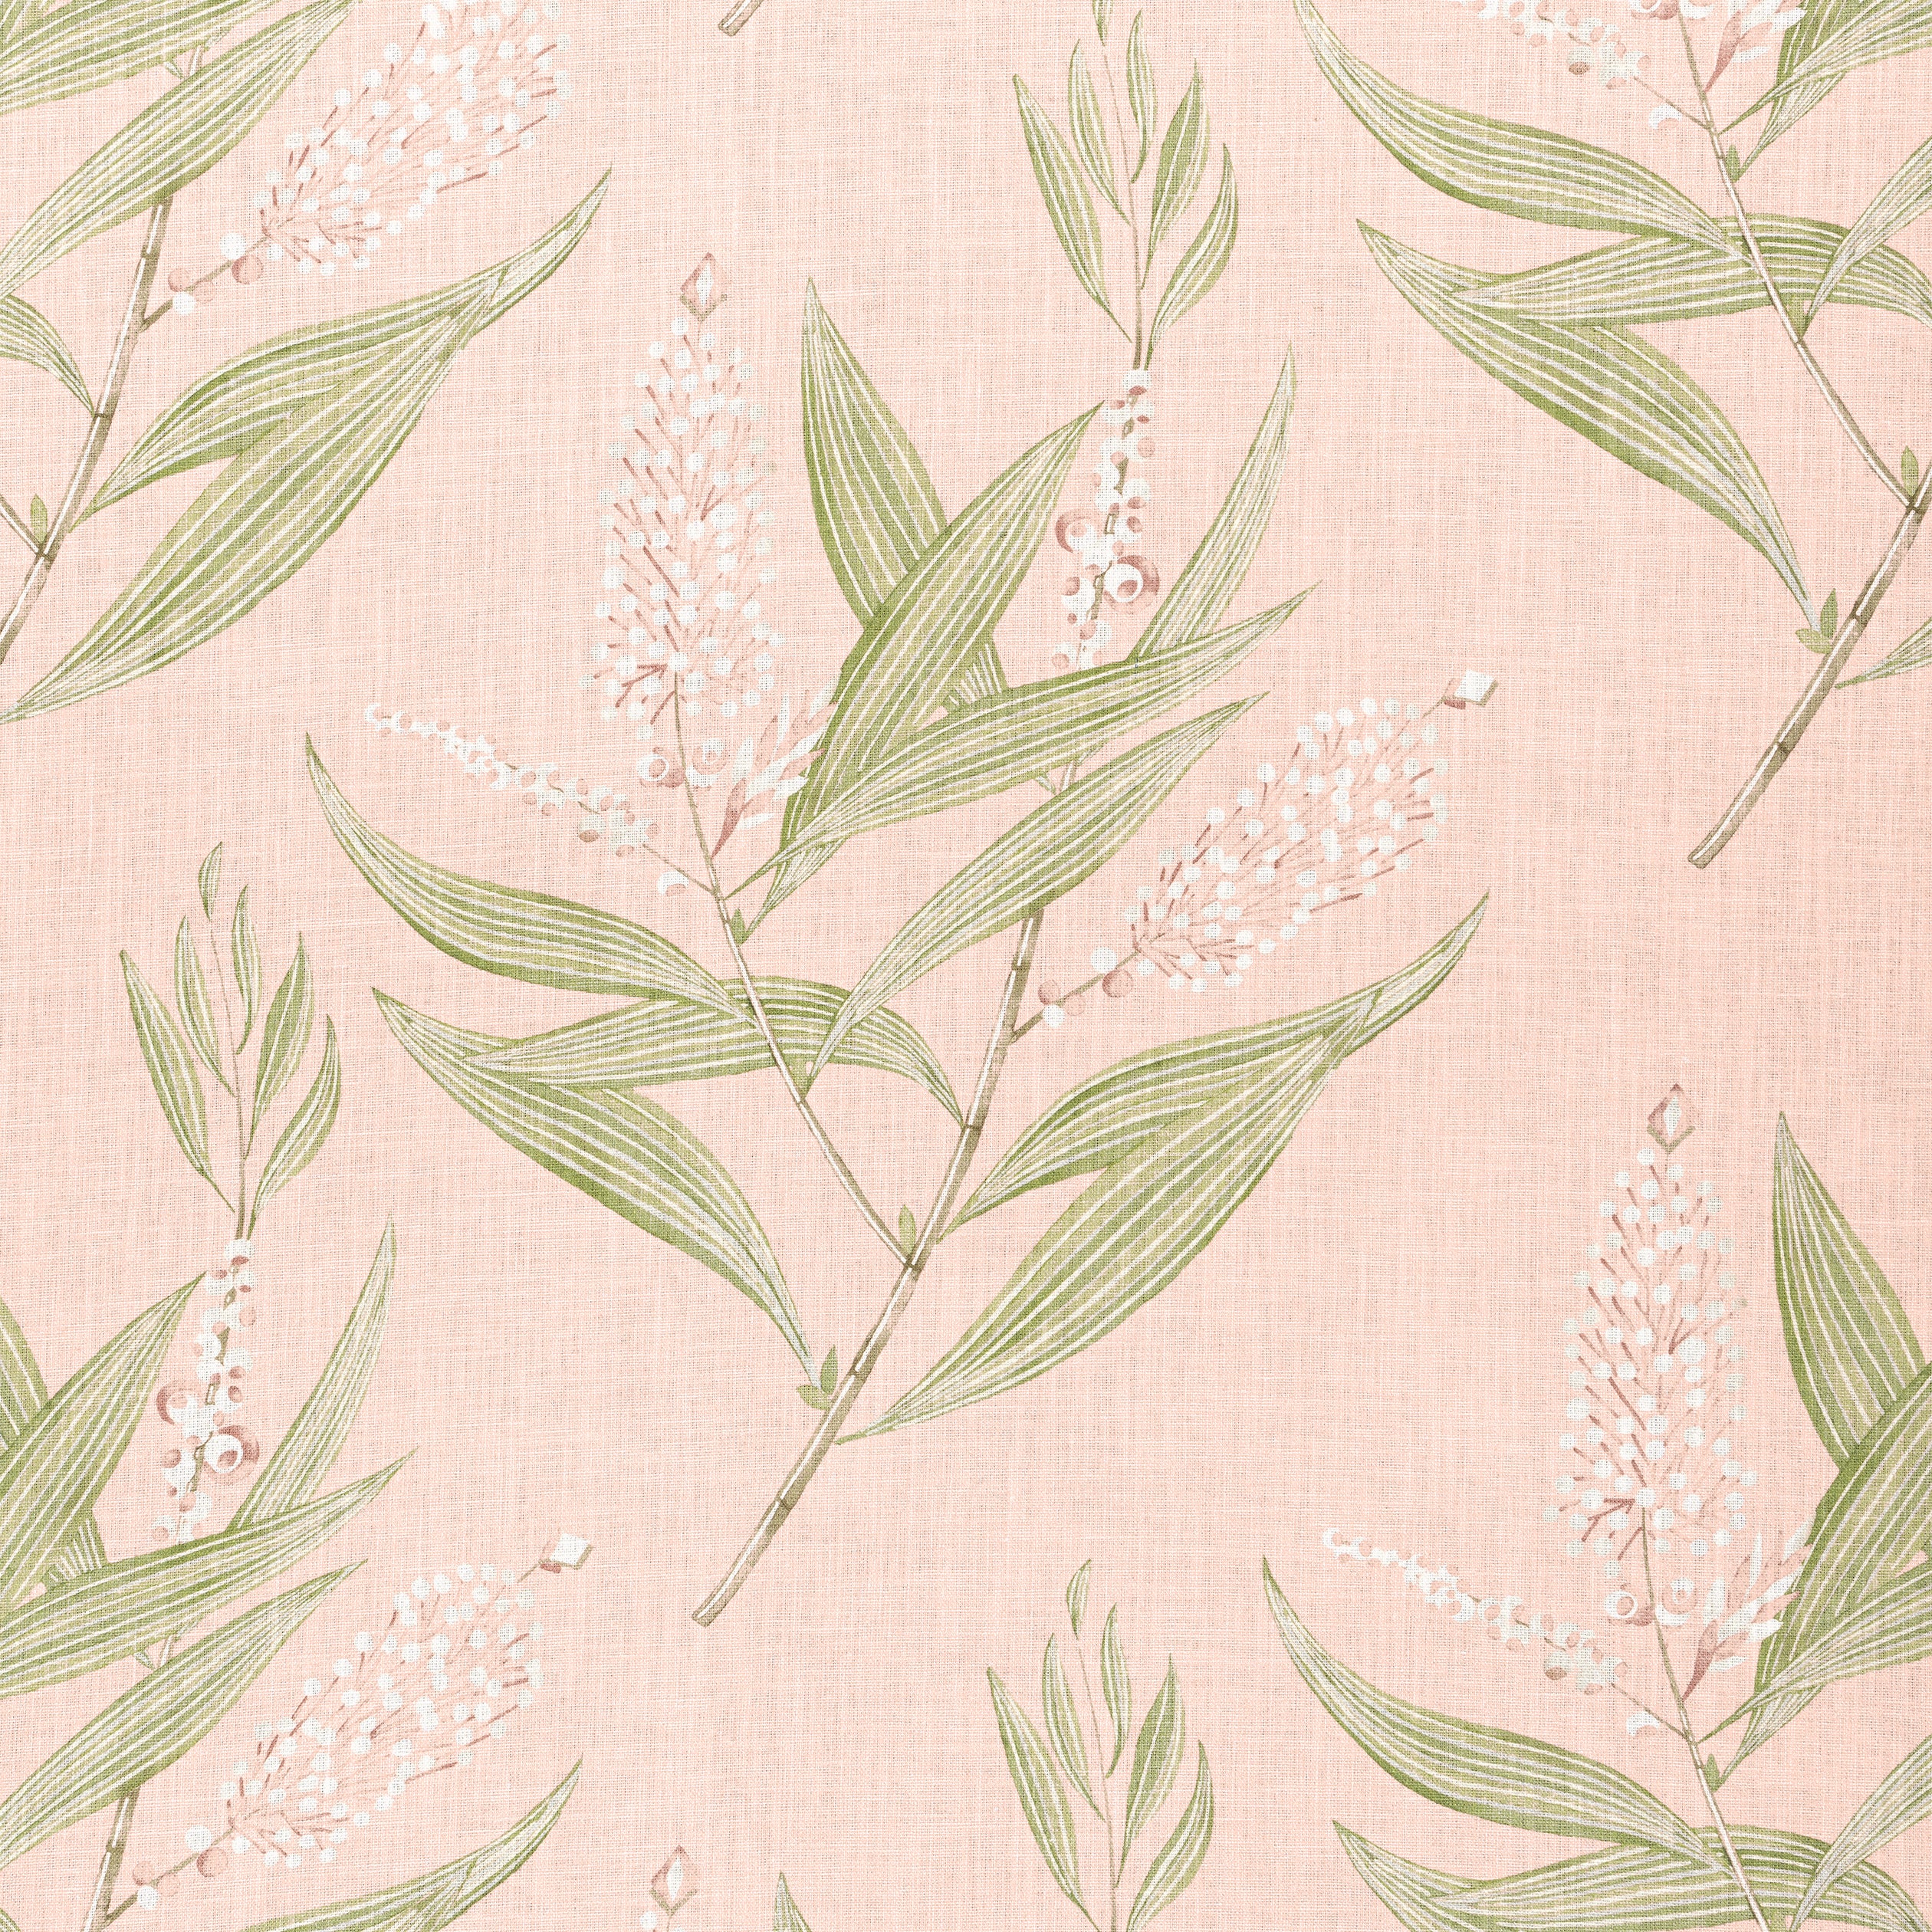 Winter Bud fabric in blush color - pattern number AF23132 - by Anna French in the Willow Tree collection